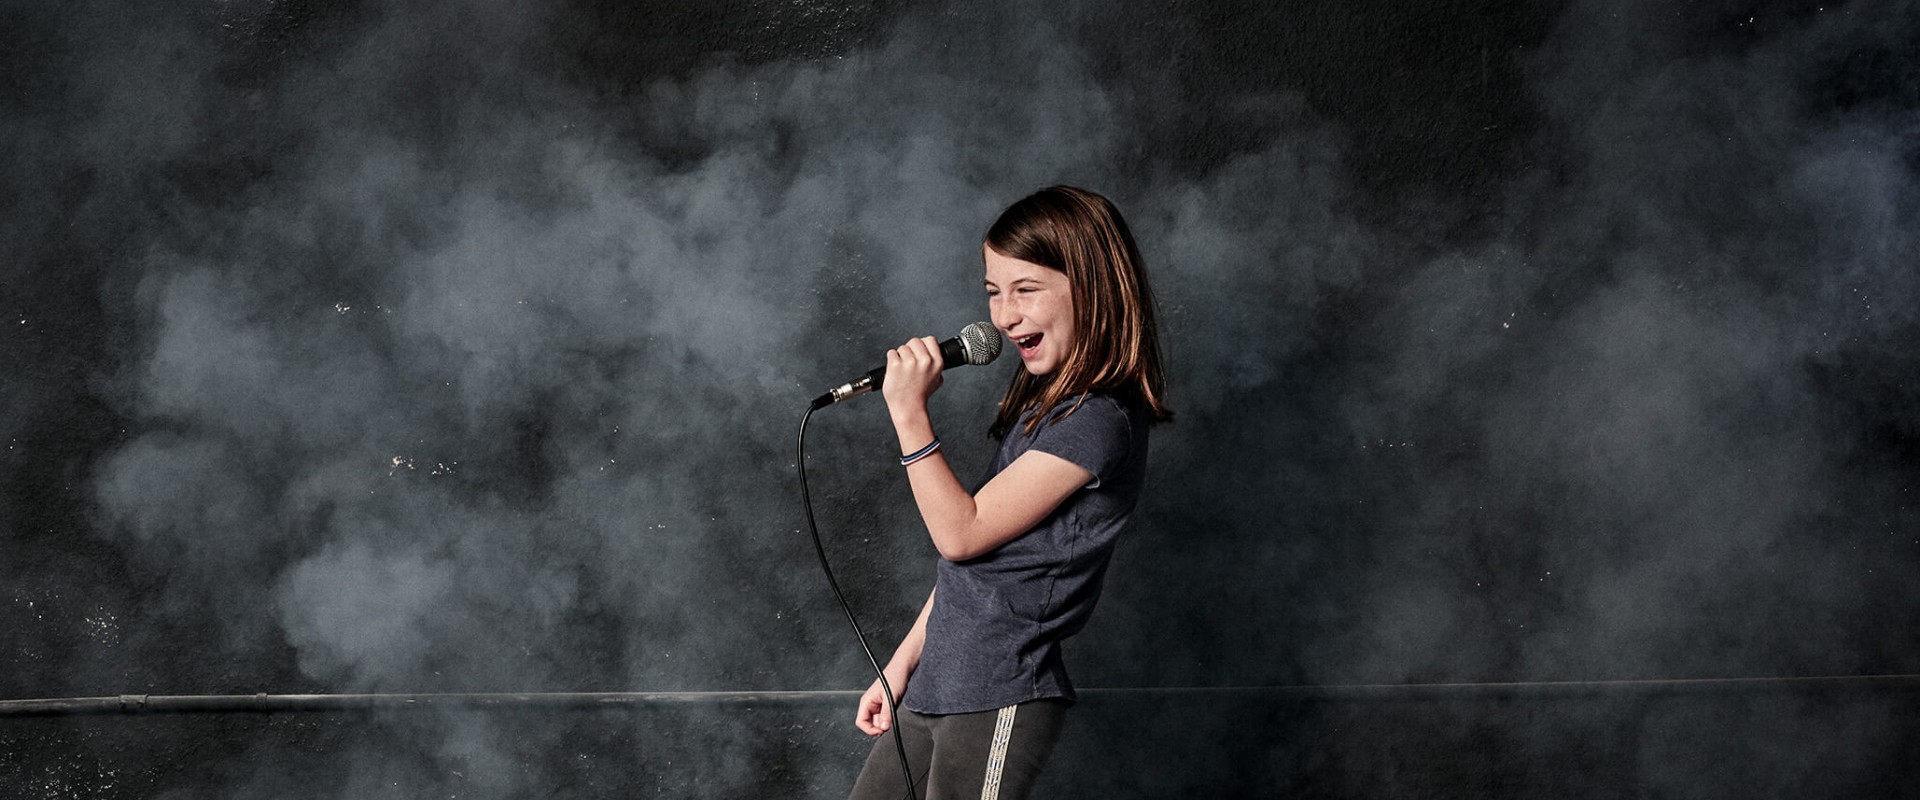 What age should you start vocal lessons?